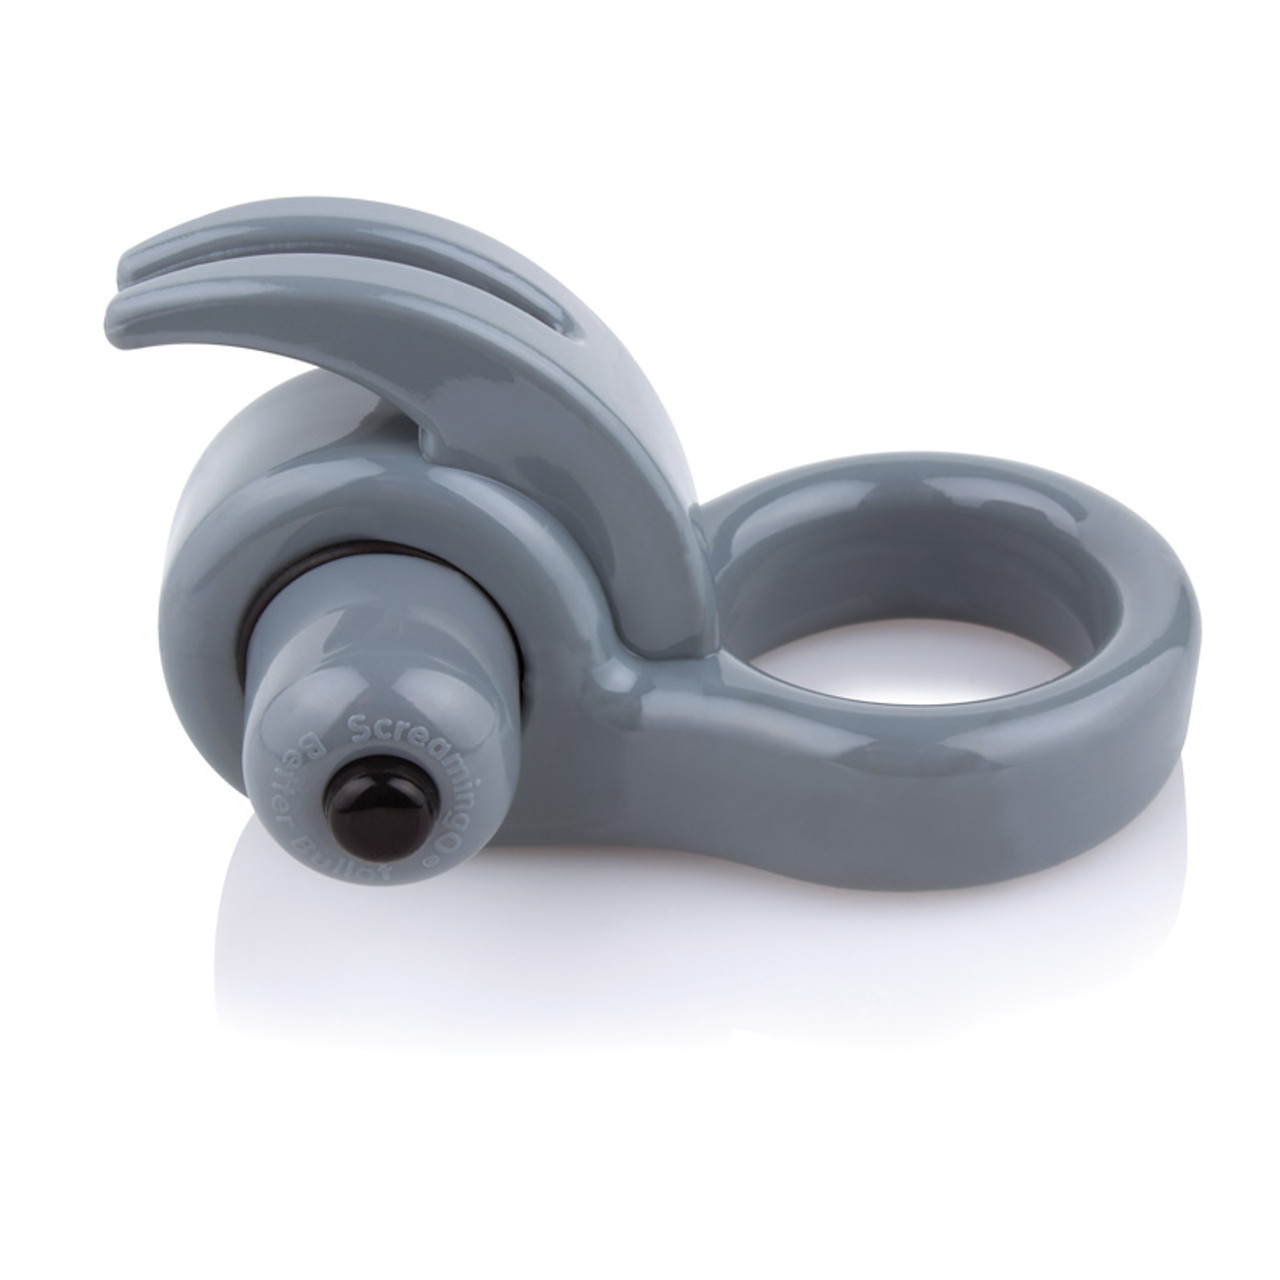 Screaming O 'Orny Rumbling 4-function Silicone Penis Ring with